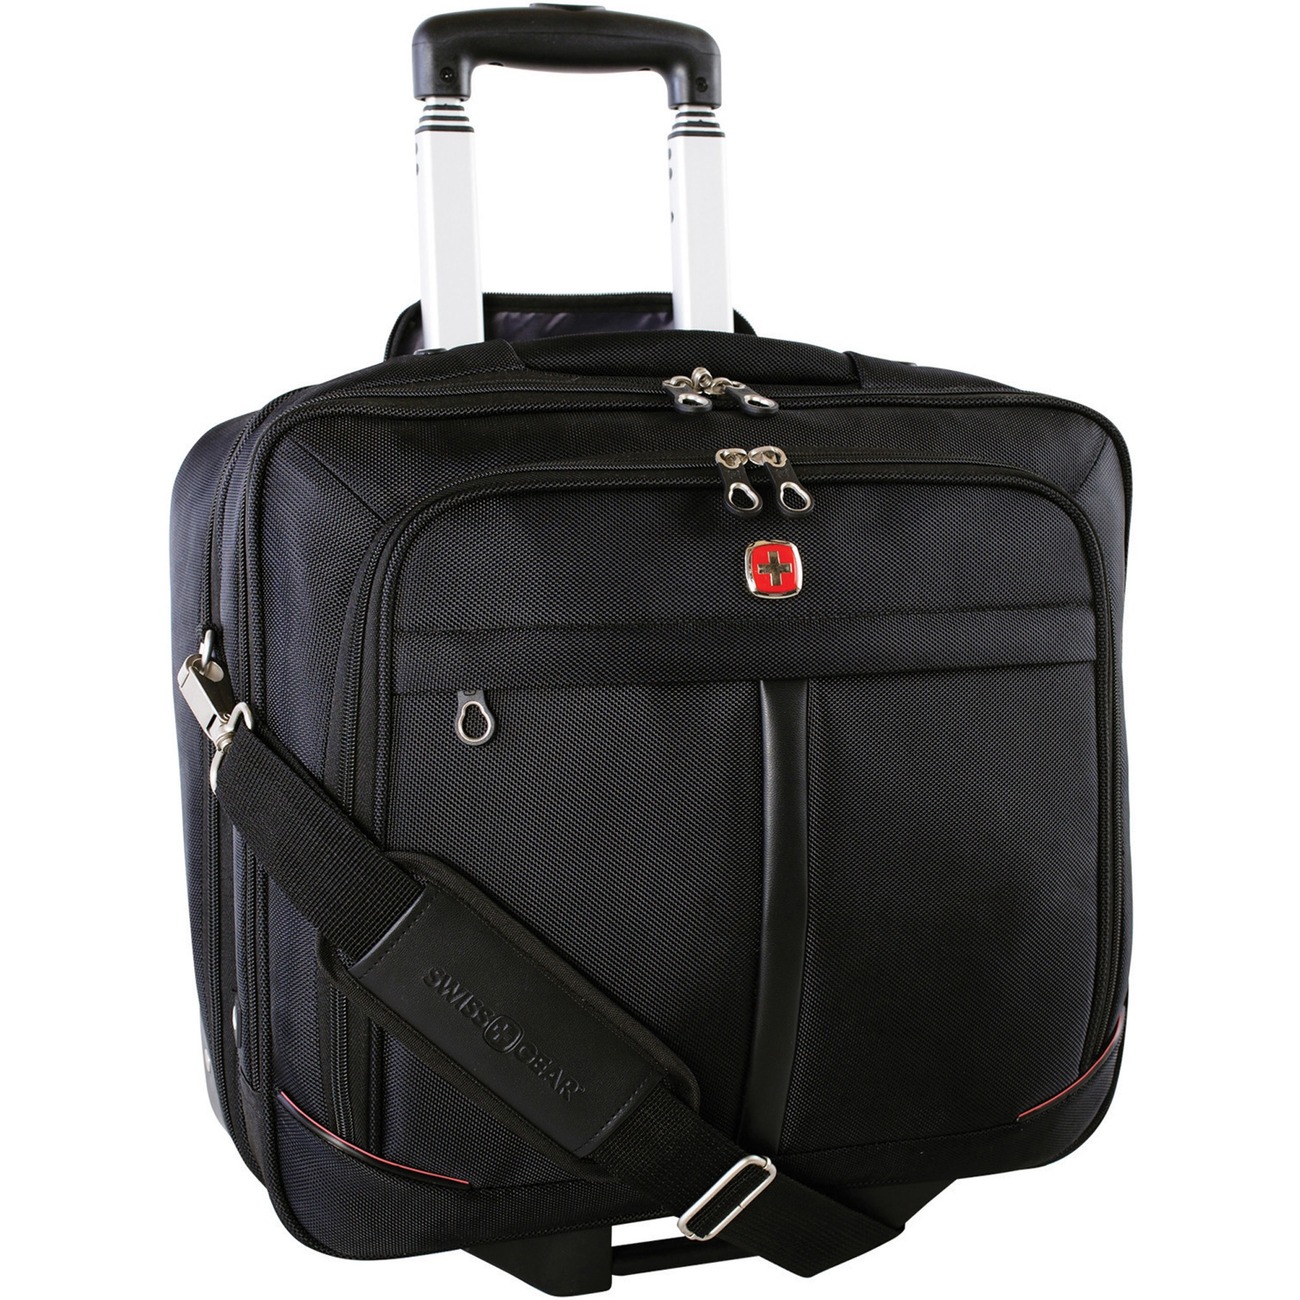 West Coast Office Supplies :: Office Supplies :: Business/Travel Bags ...